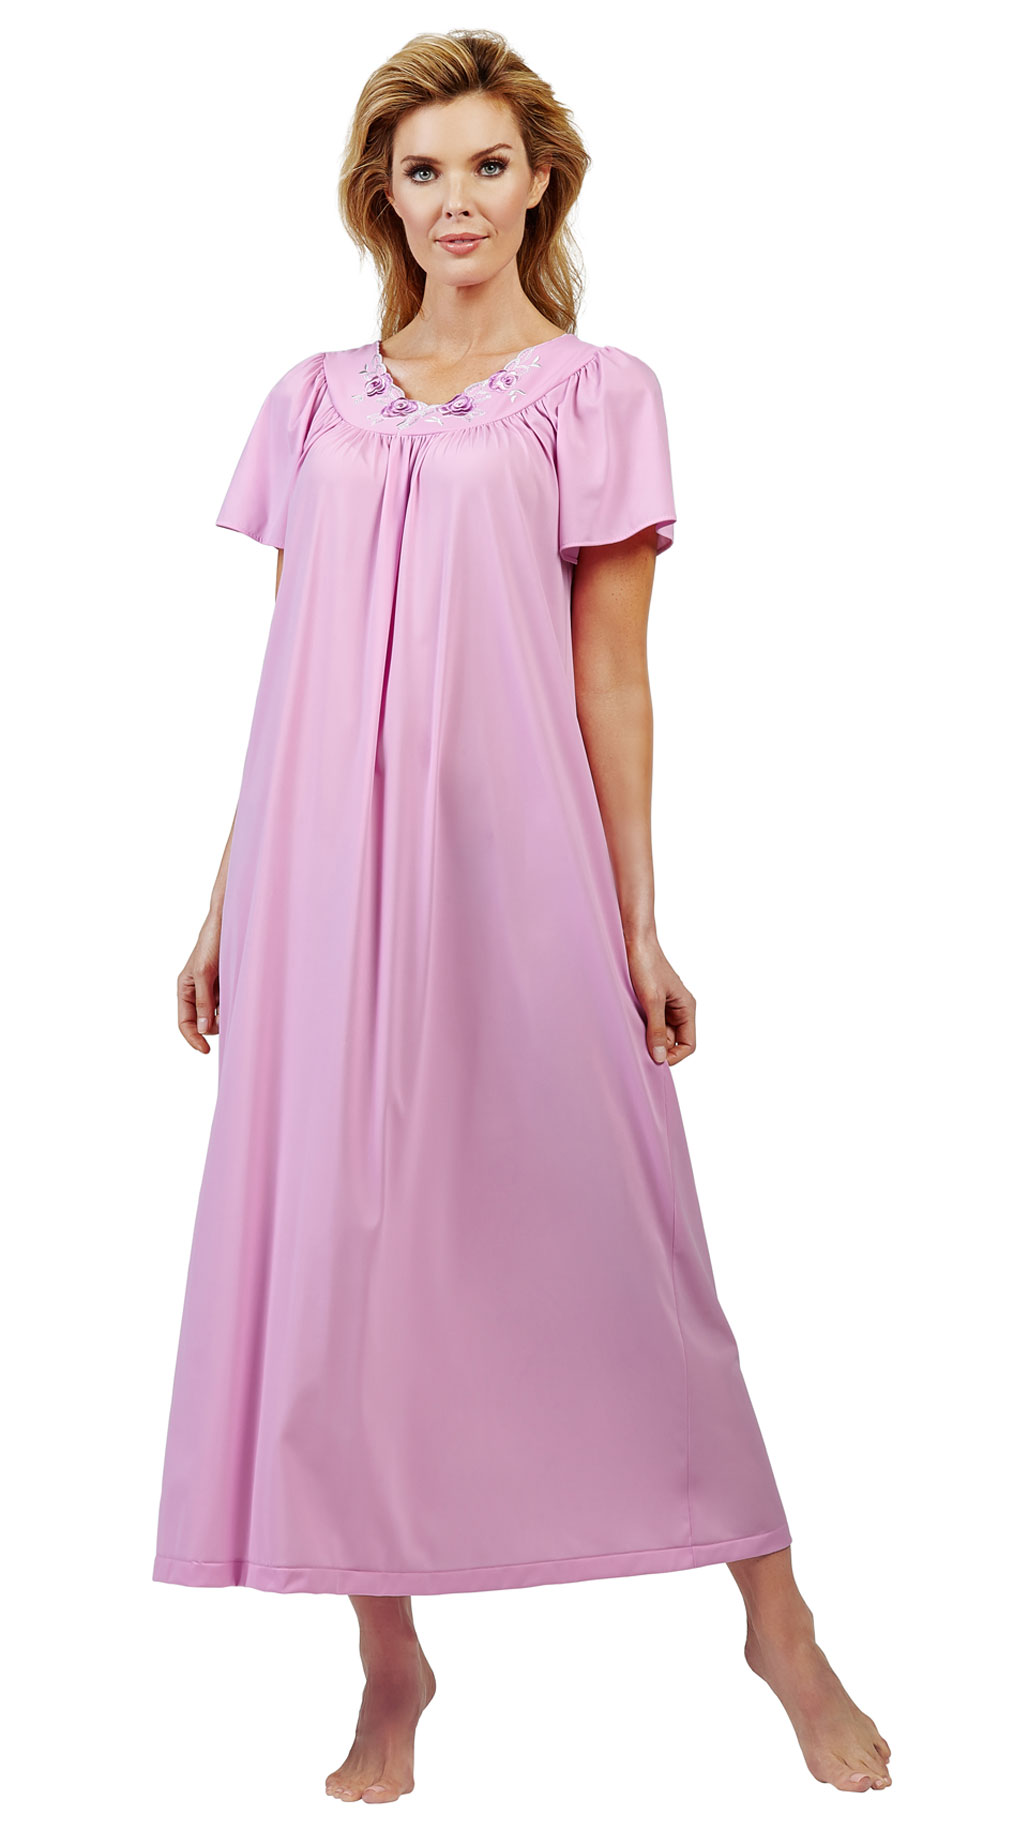 nightgown - Online Discount Shop for Electronics, Apparel, Toys, Books